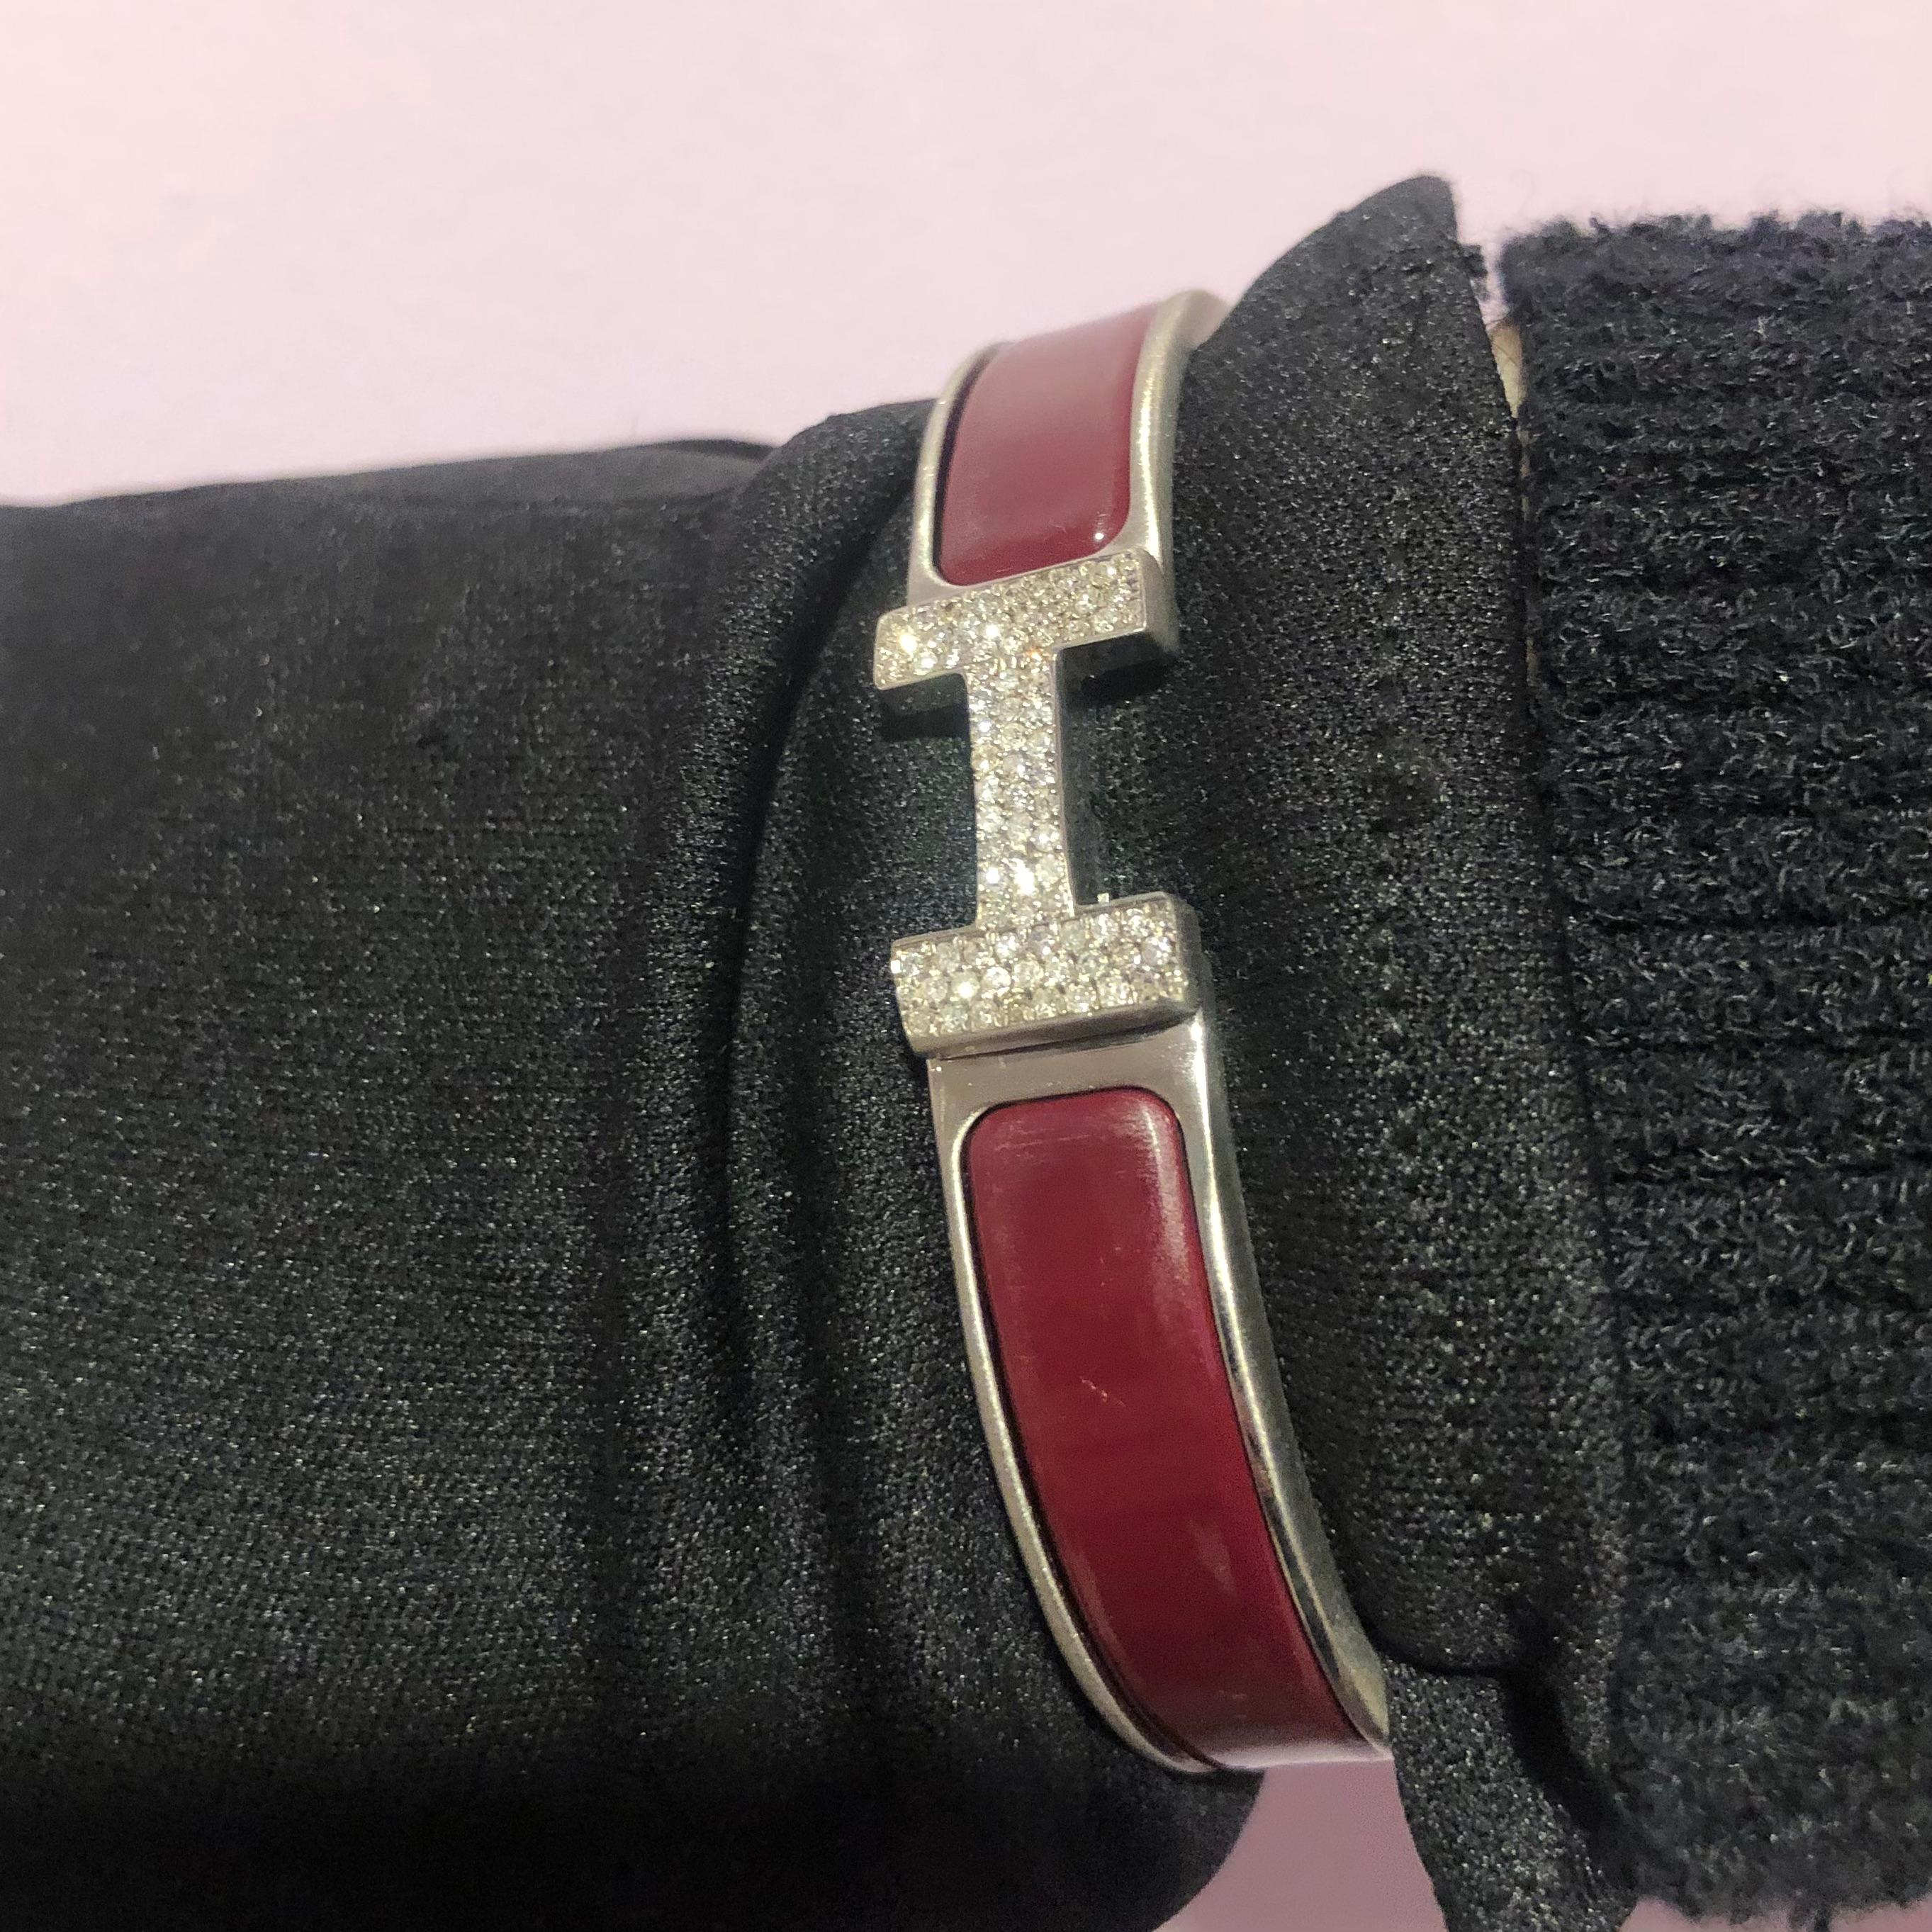 Custom Diamond Hermes Clic H Bracelet complete with original box.

An original Hermes Clic H bracelet GM size in Red and Silver color is customized hand-set with approx. 1.25 carats of natural genuine earth-mined SI-I Diamonds. The diamonds shine